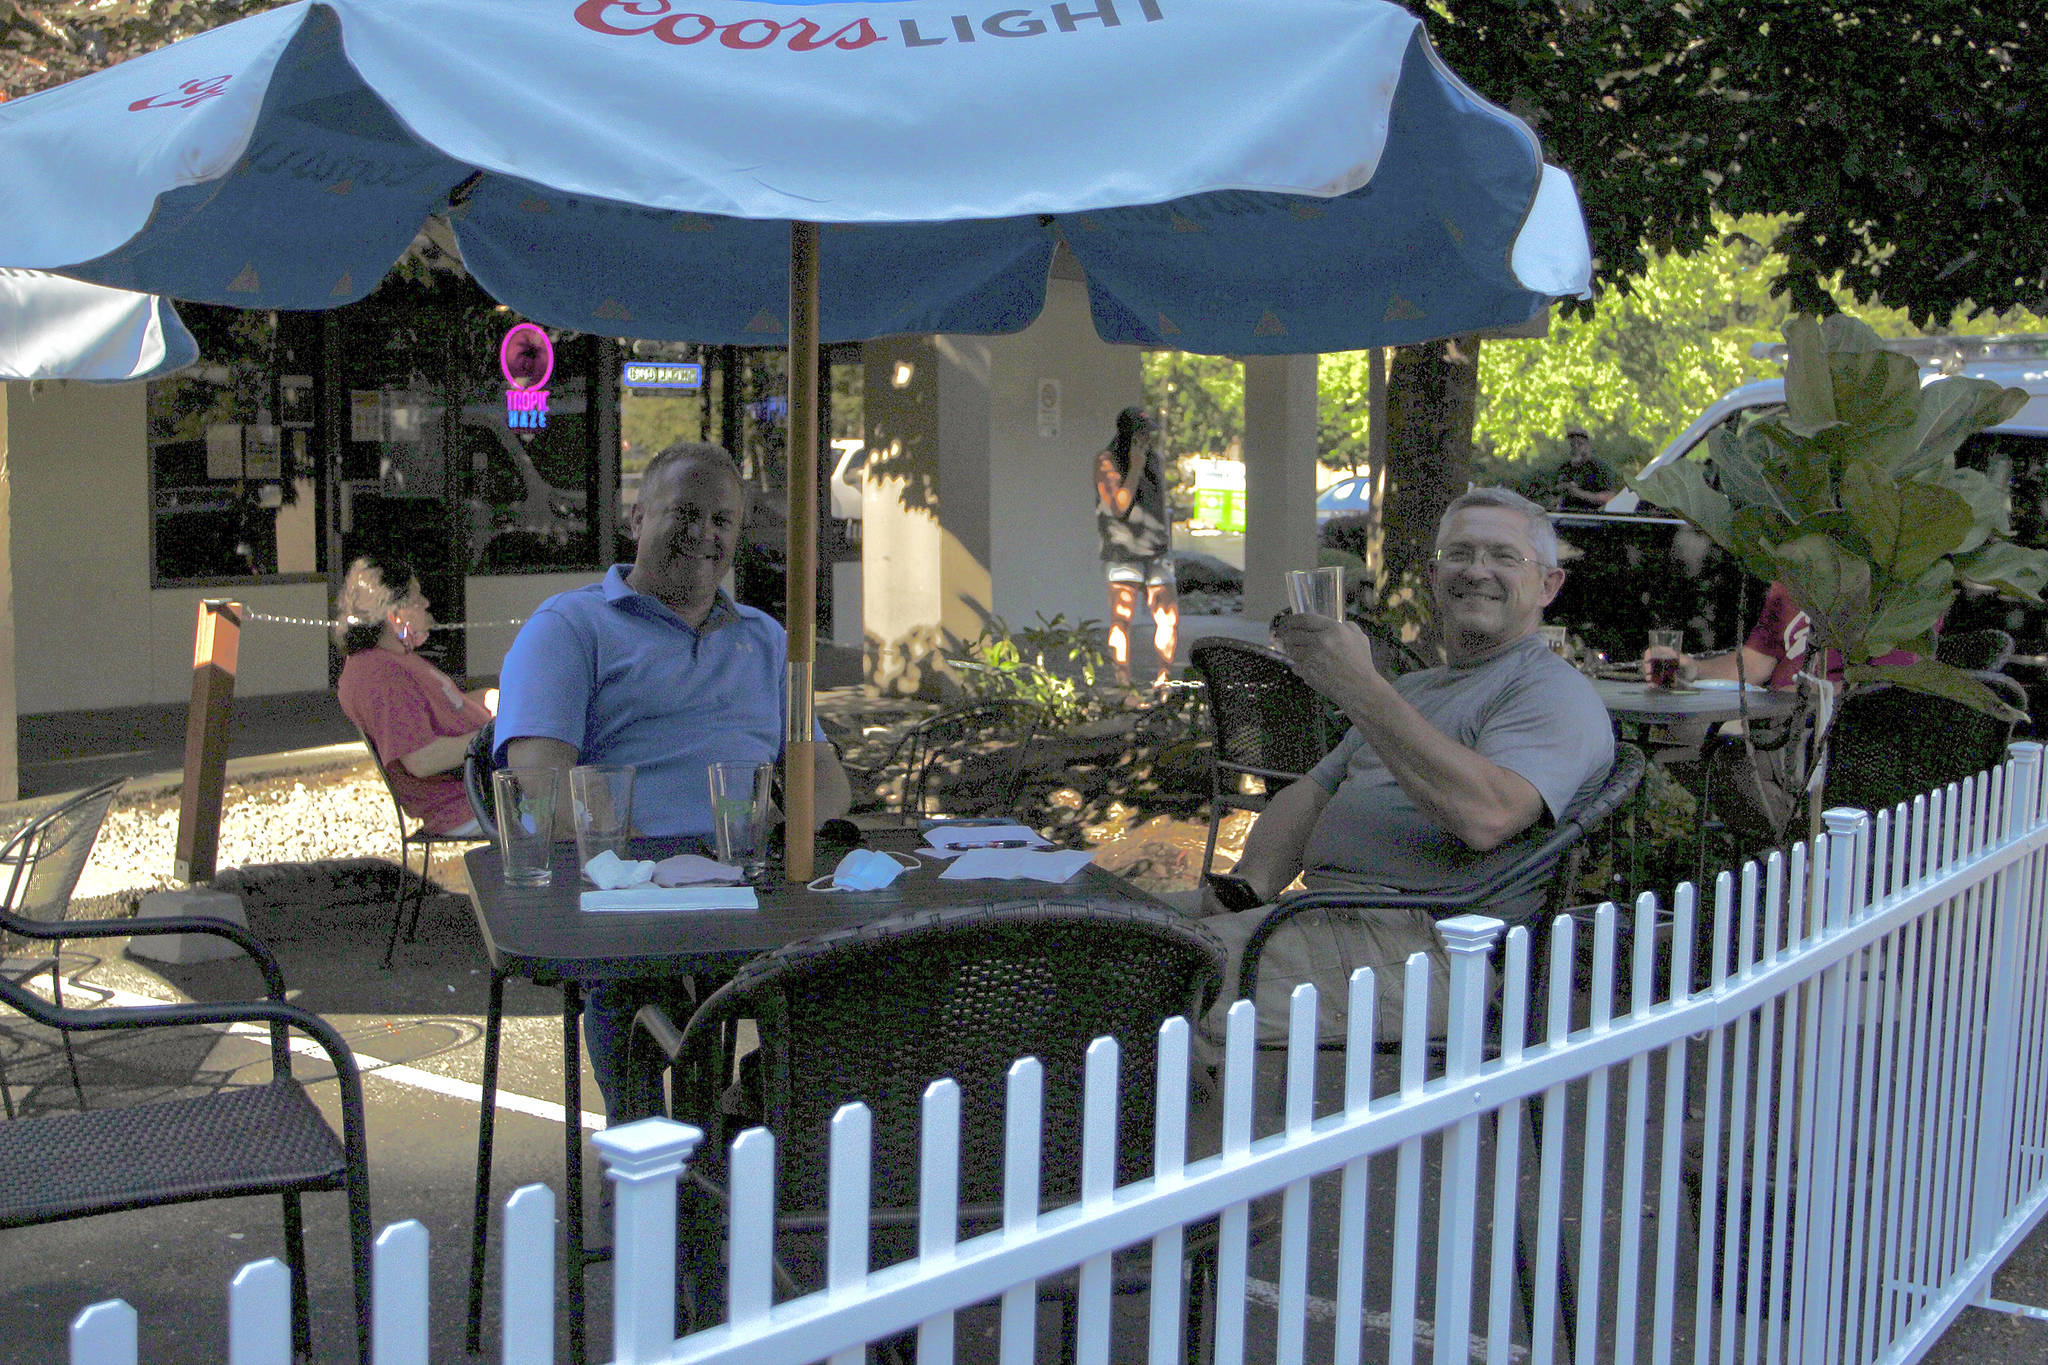 Federal Way residents Kevin Jochim, left, and Steve Reichel enjoy drinks on the new patio area at JP’s Tavern on Aug. 5, 2020. Restaurants and bars embraced outdoor seating during the pandemic. File photo